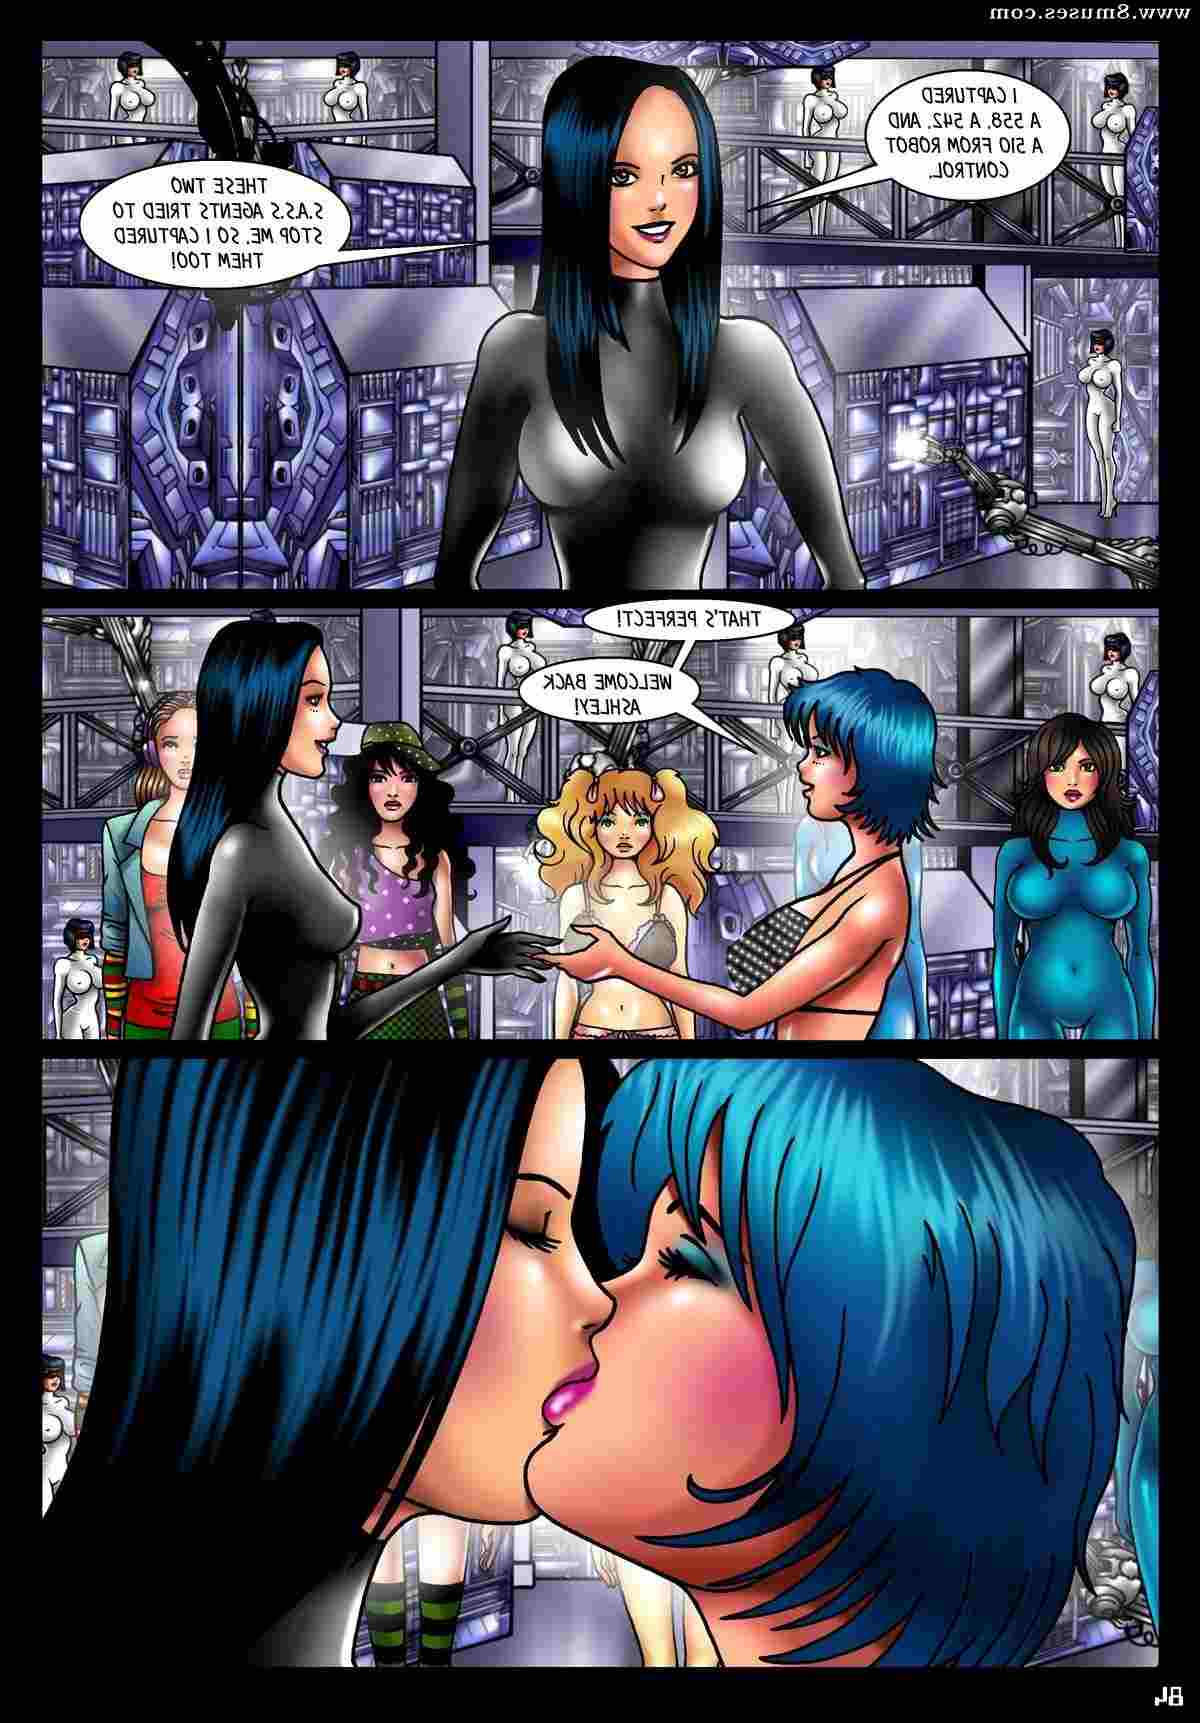 Various-Authors/AB-Lust/Shemale-Android-Sex-Sirens-Renegades Shemale_Android_Sex_Sirens_-_Renegades__8muses_-_Sex_and_Porn_Comics_85.jpg